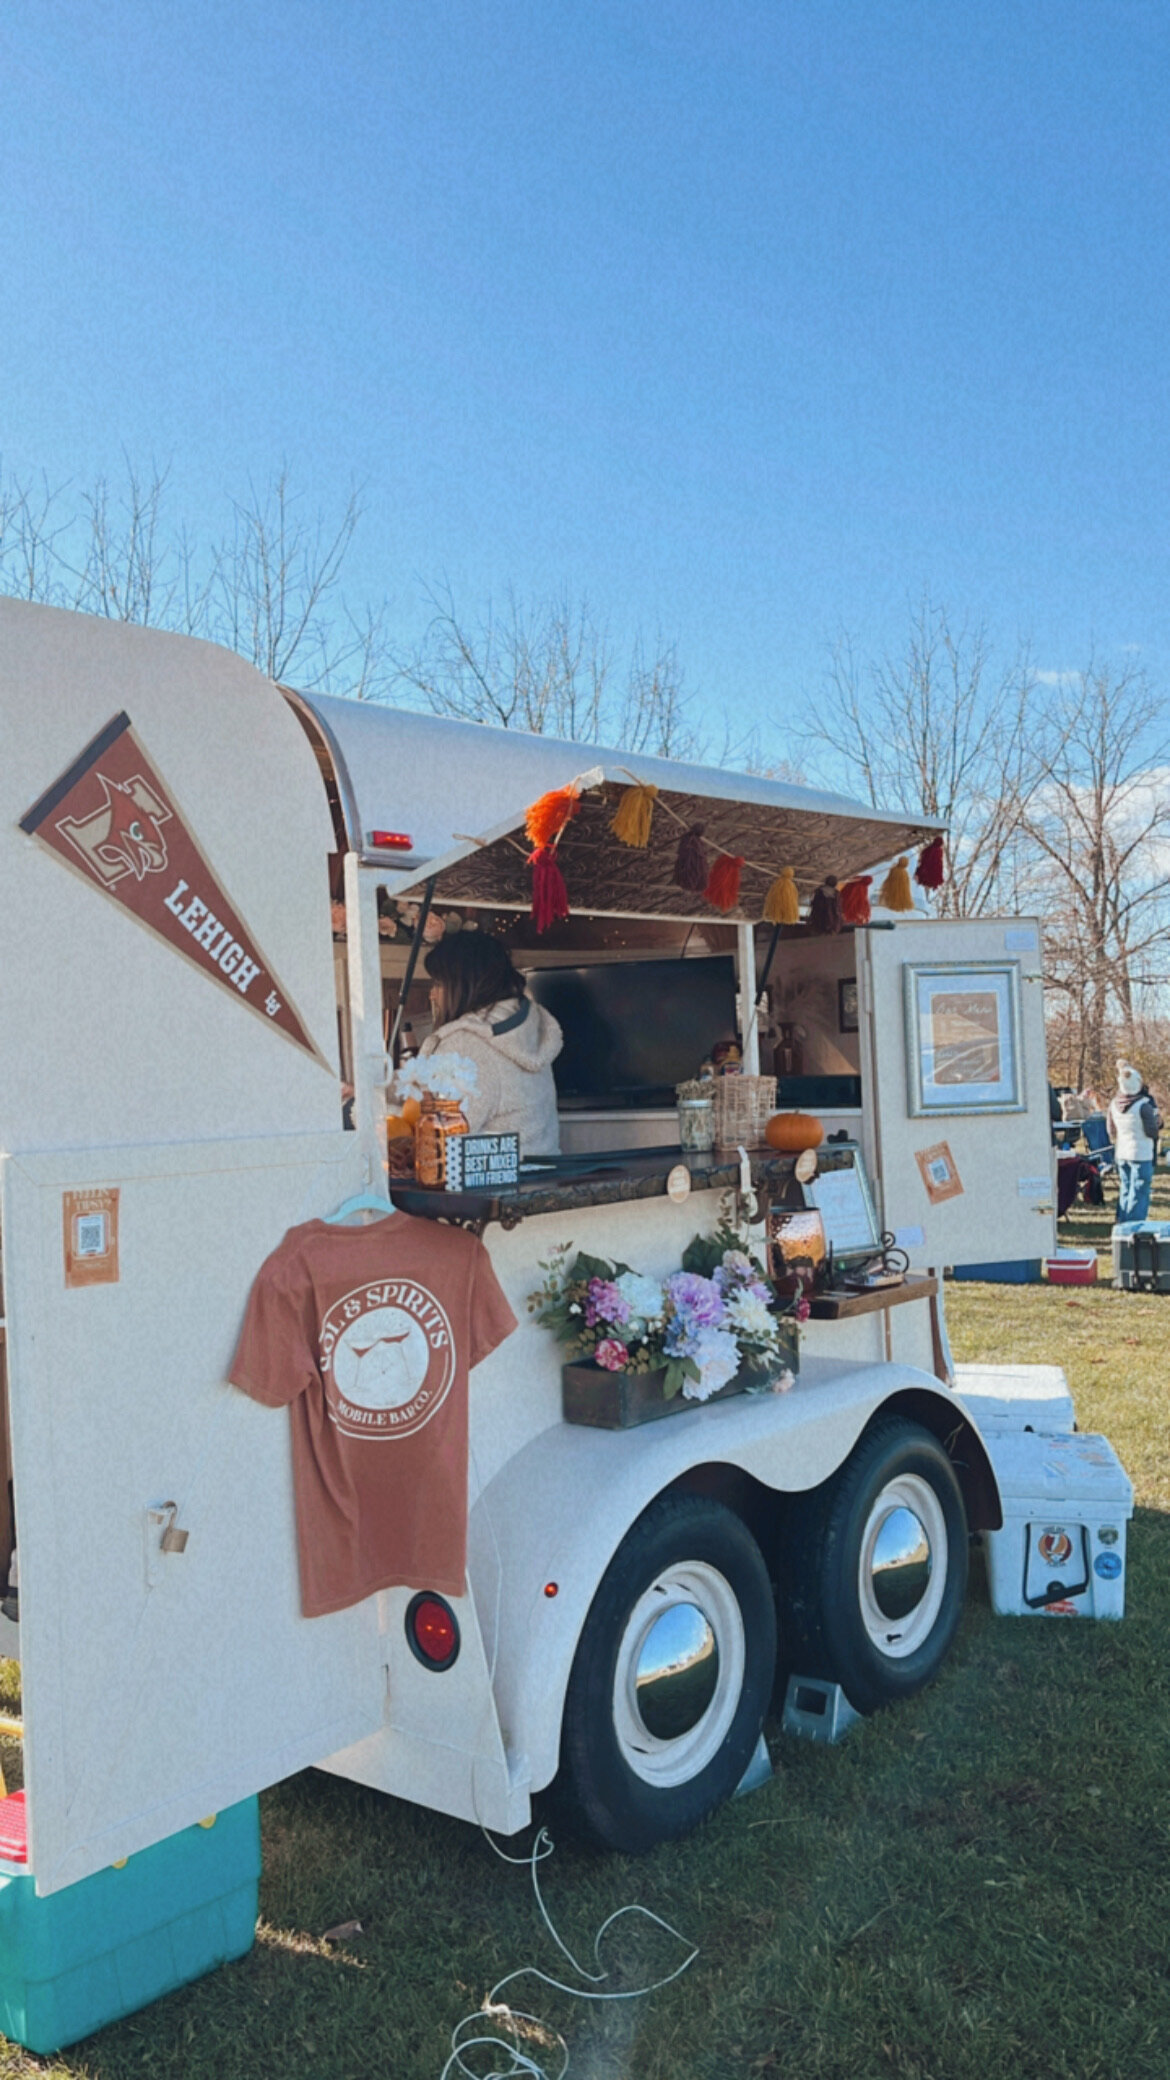 Trailer with flowers, t shirt, and other decor hanging on it at event outside